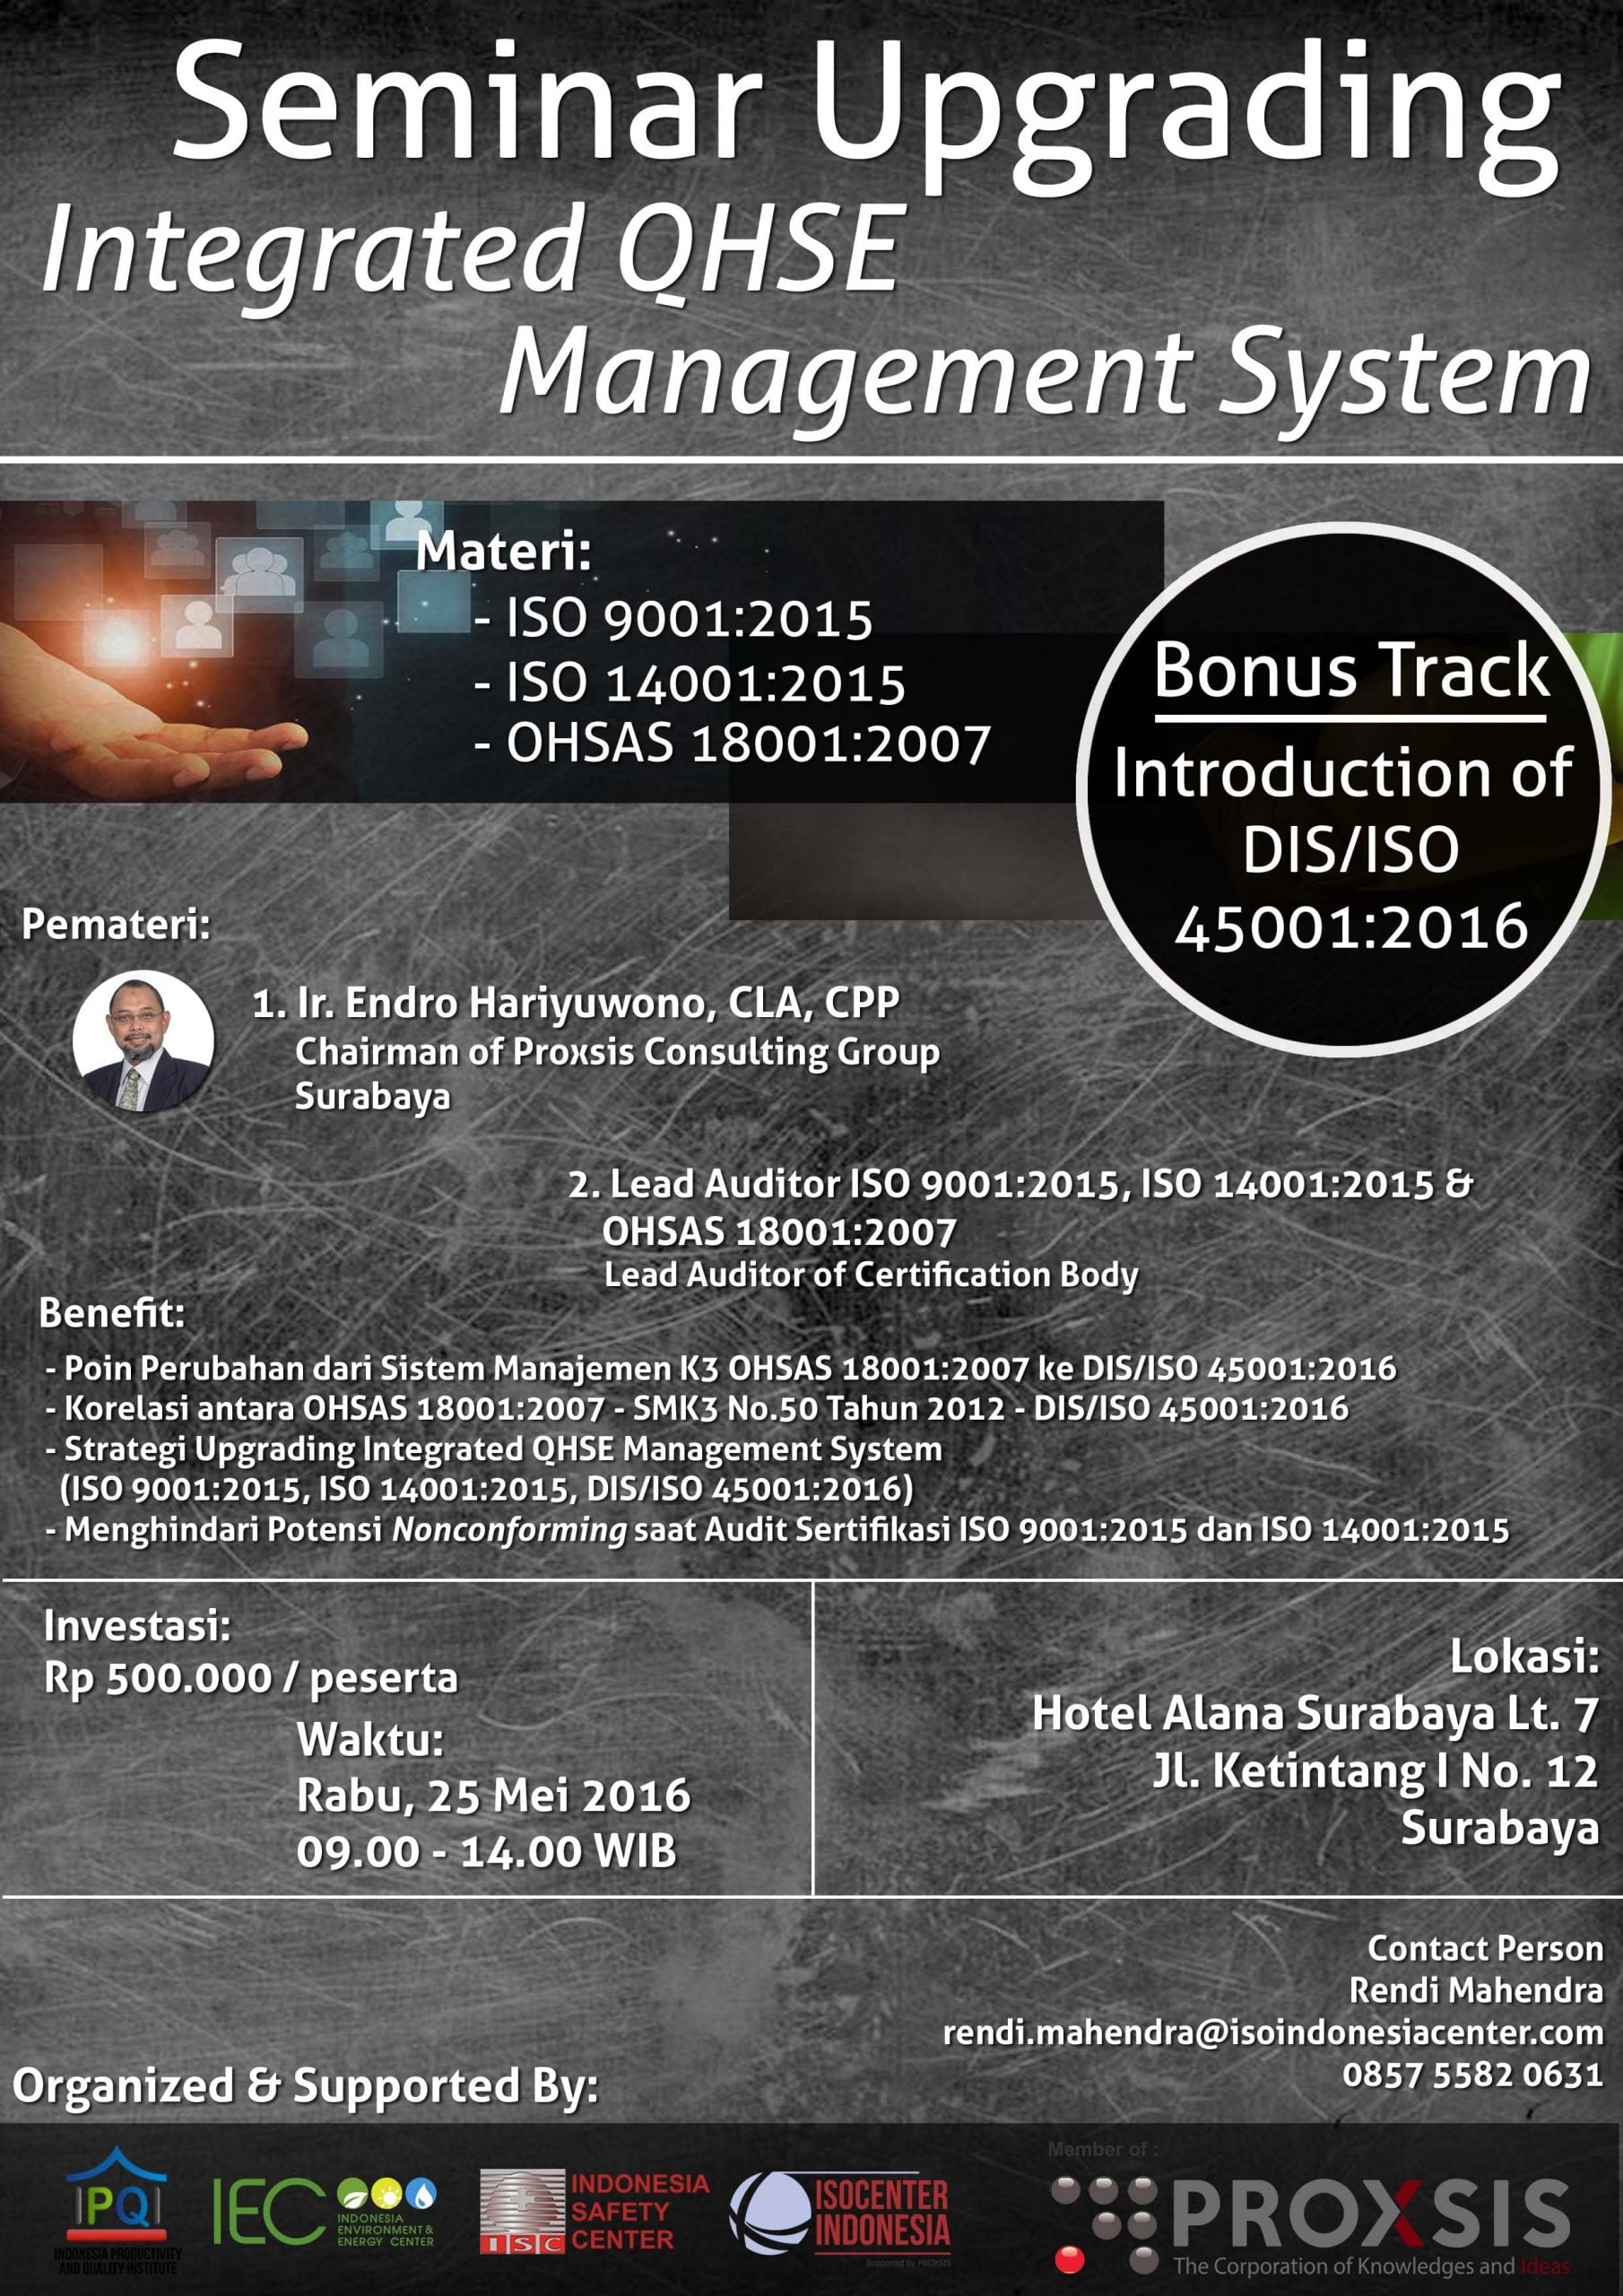 Seminar Upgrading Integrated QHSE Management System